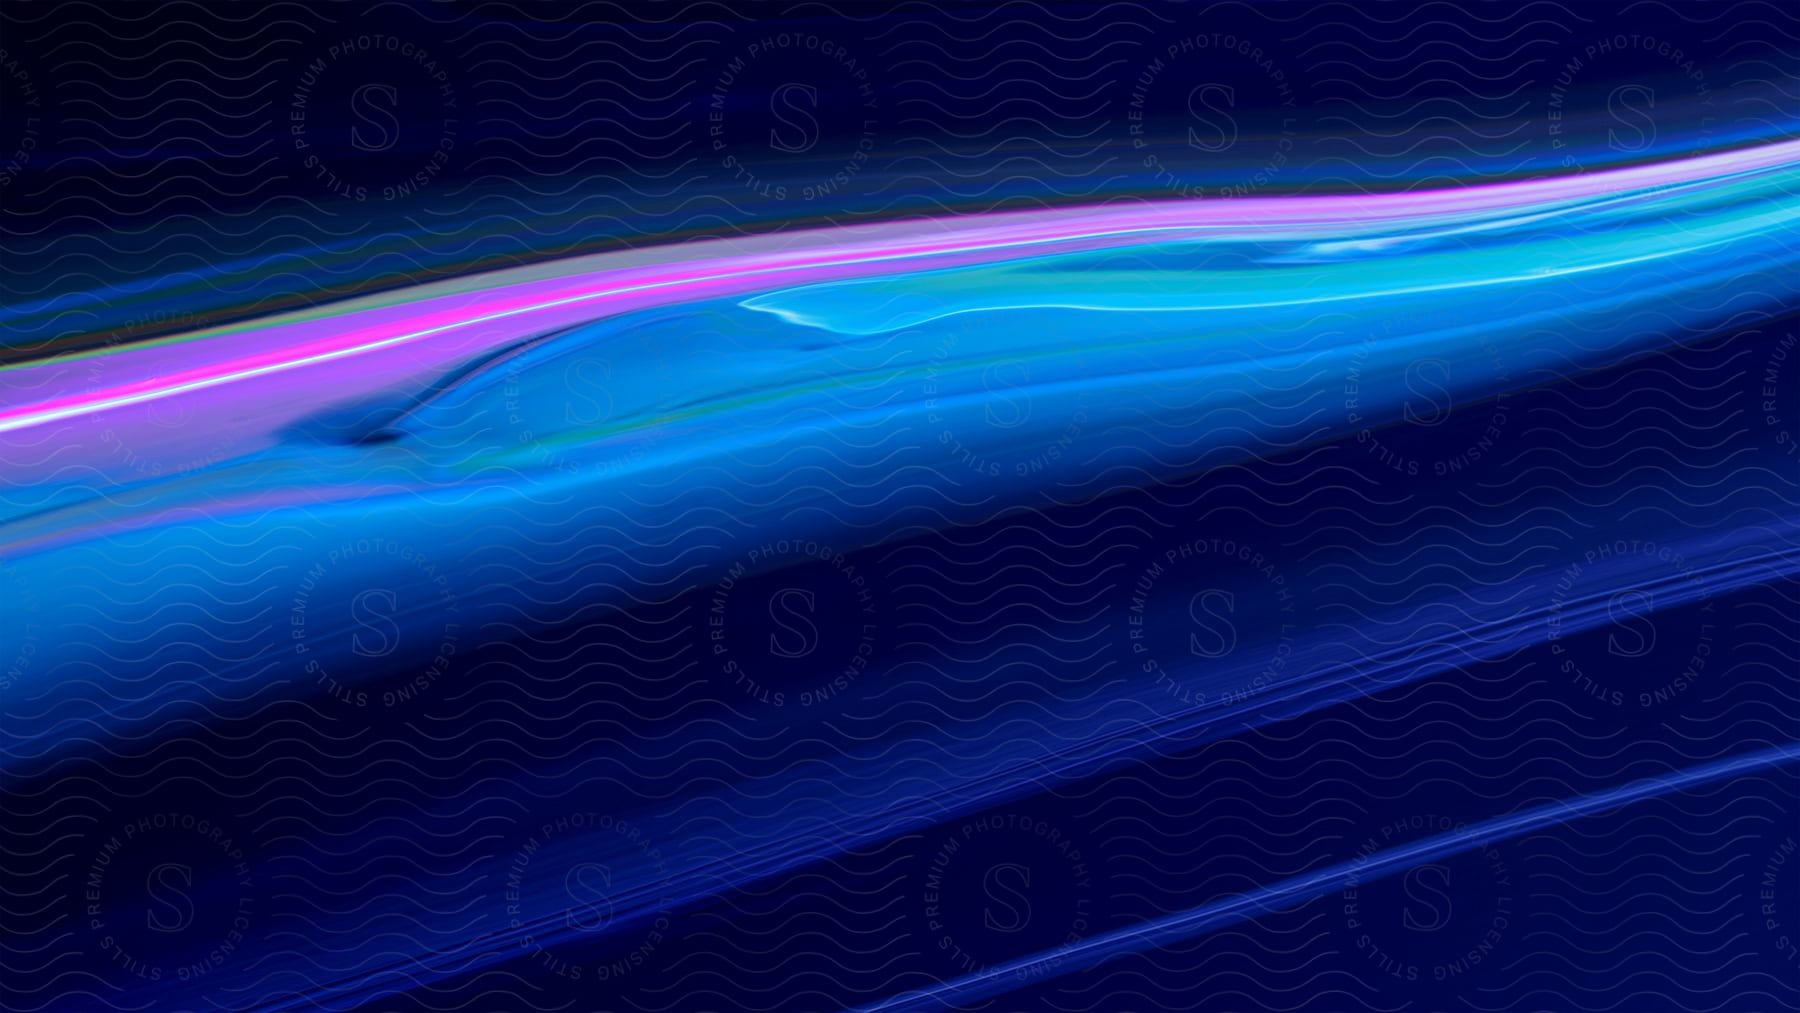 A computer graphic of blue and pink liquid line patterns on a dark background